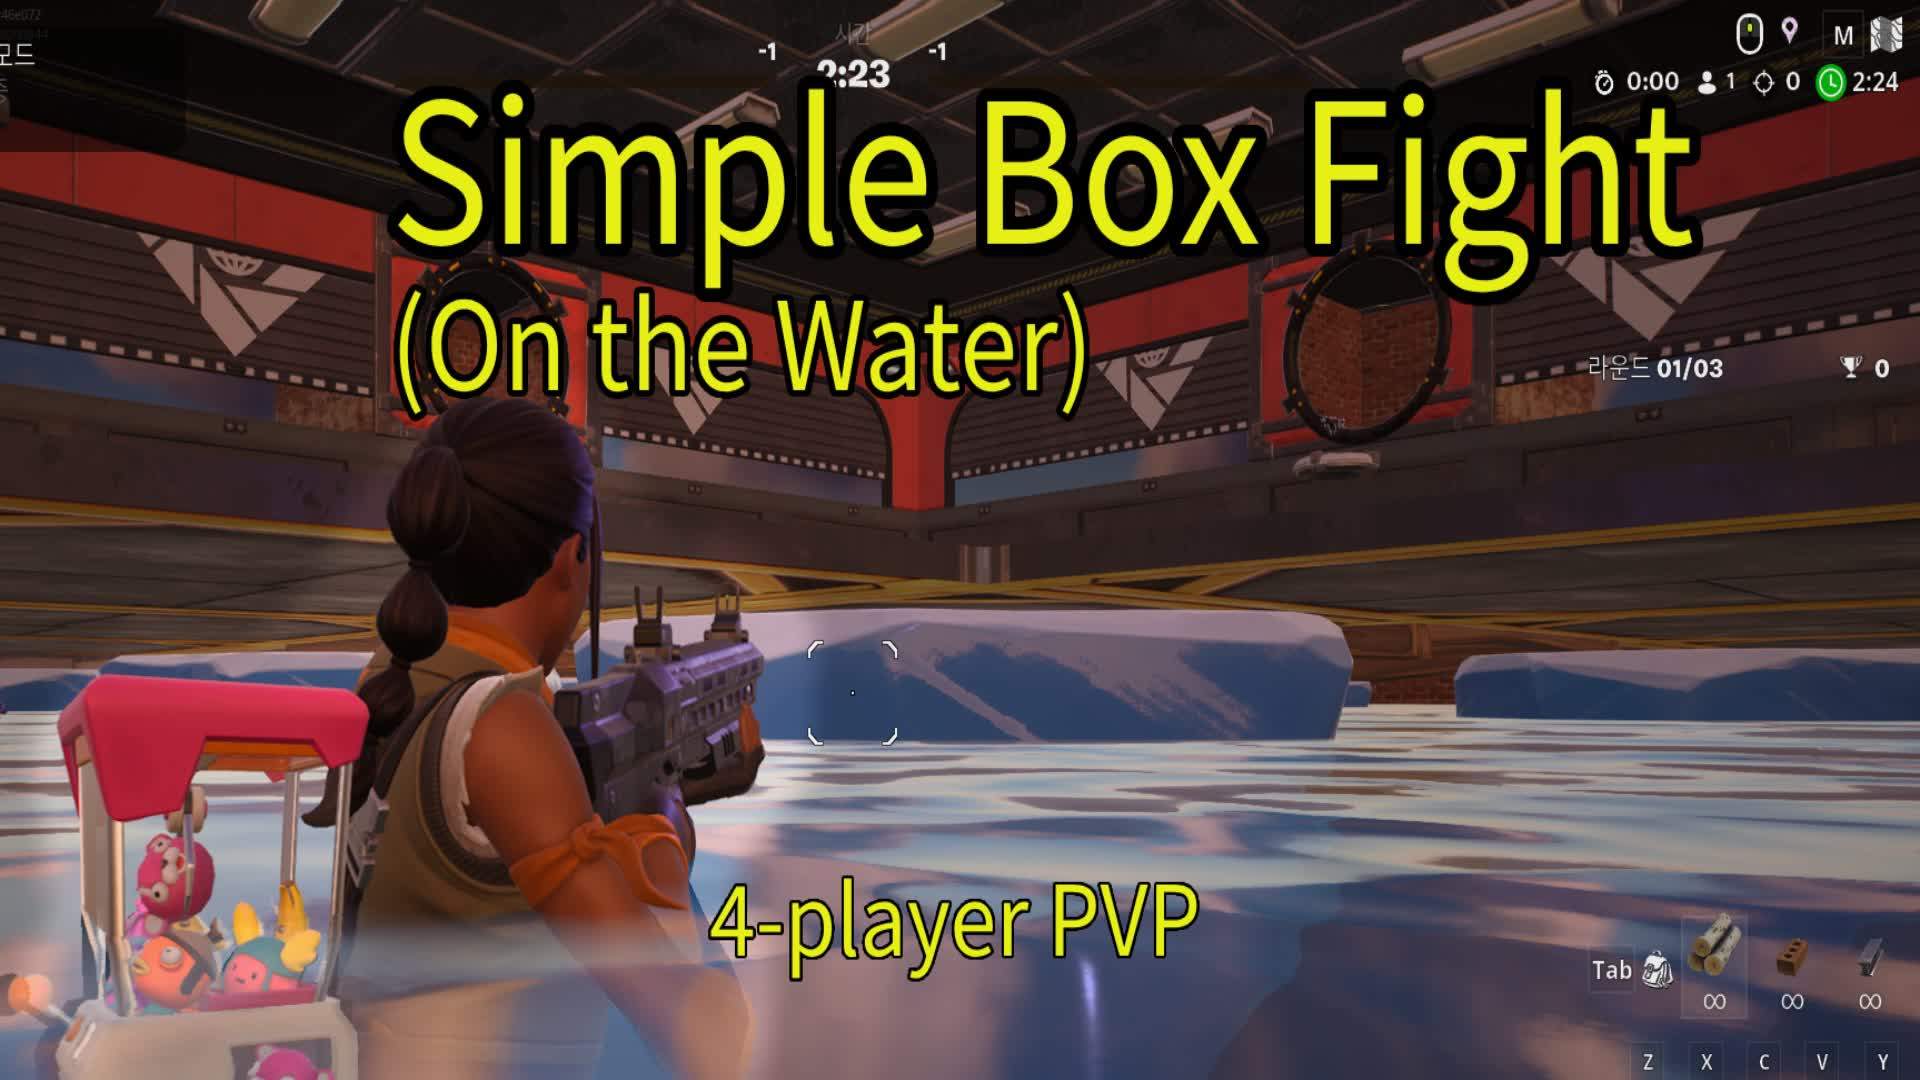 Simple Box Fight on the water